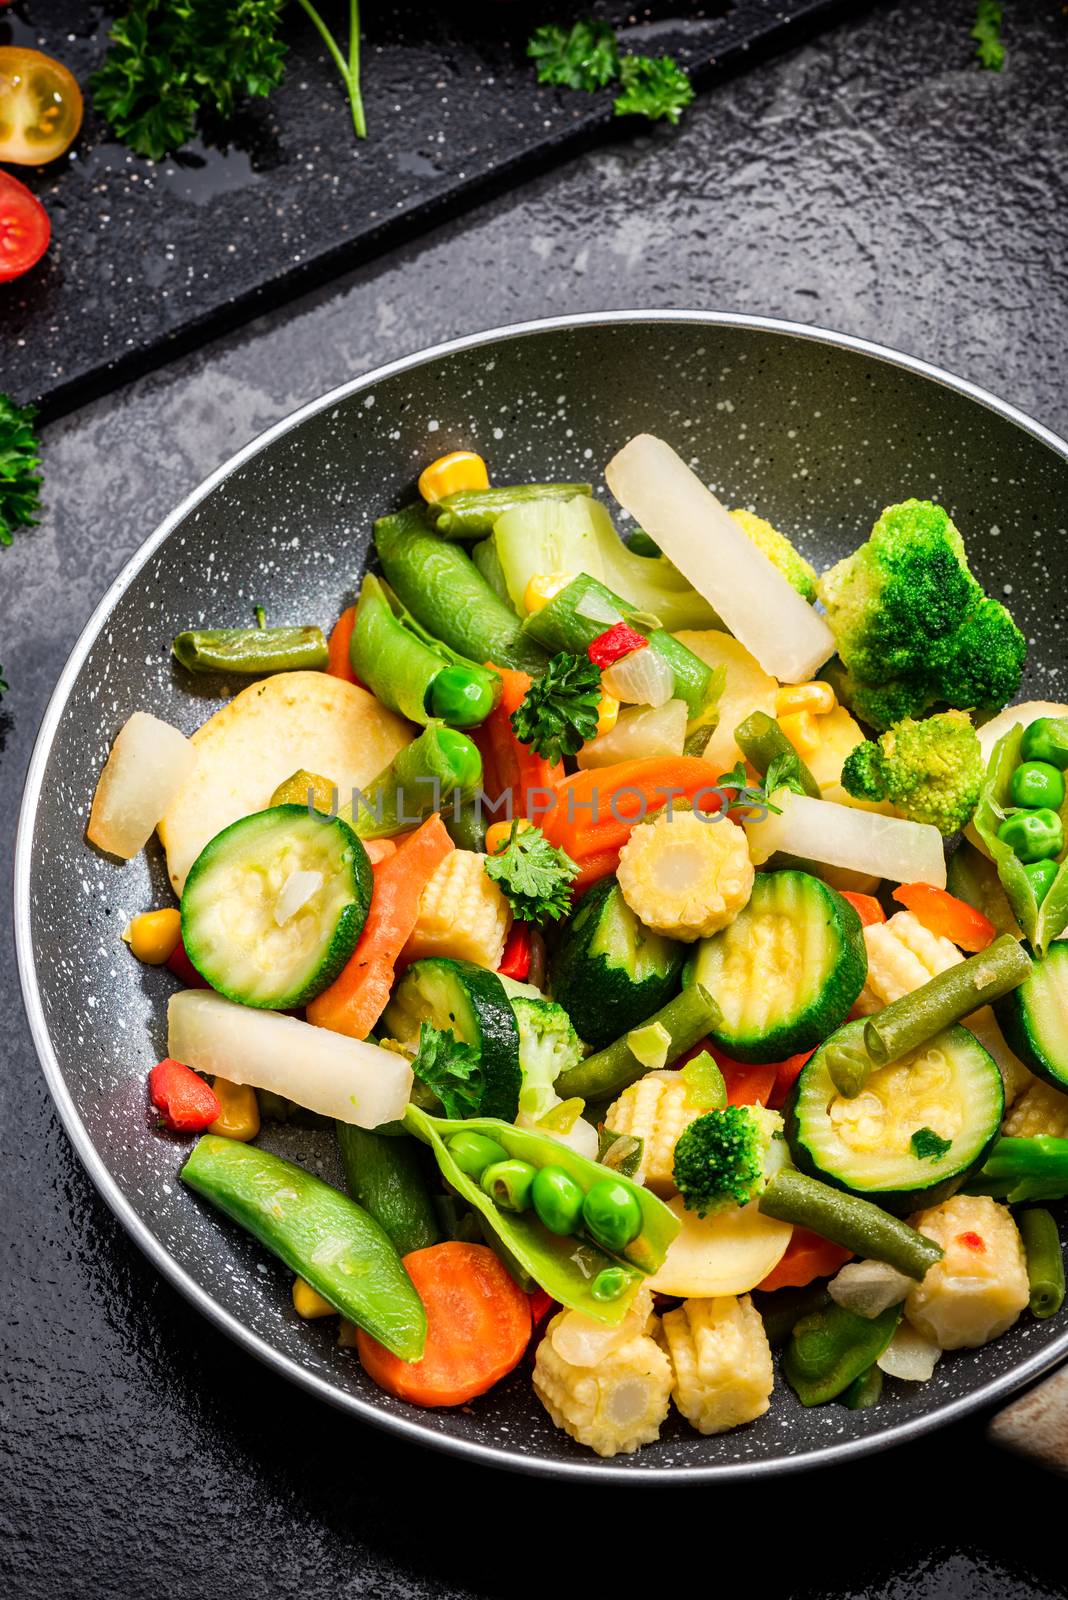 Stir Fry Vegetables on Pan Close Up View. Clean Healthy Eating. Vegetable Mix. Green Diet.